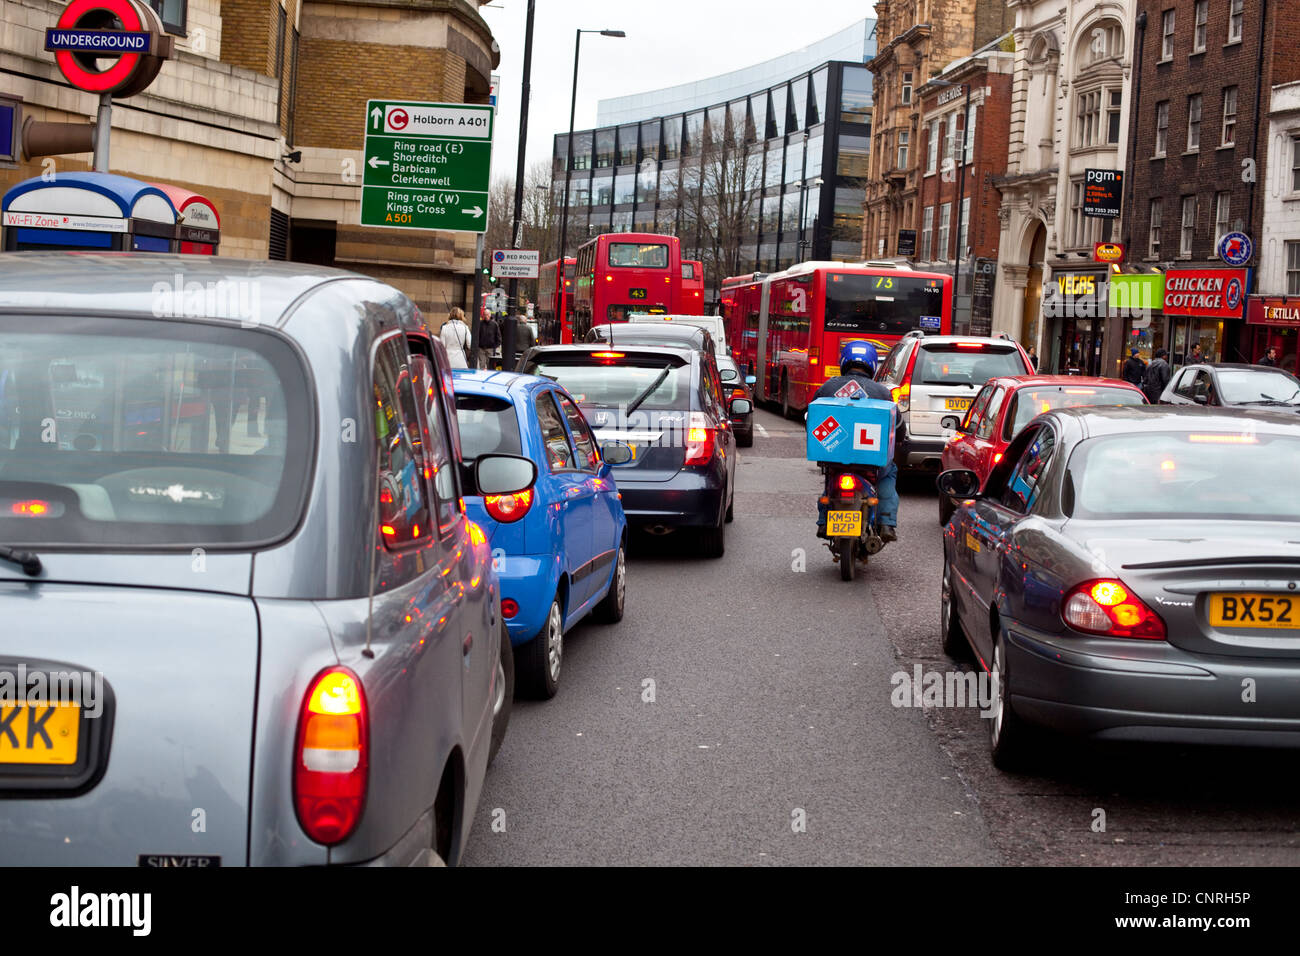 A queue of cars stuck in a heavy traffic jam, Islington High St, London, Greater London, England, UK. Stock Photo